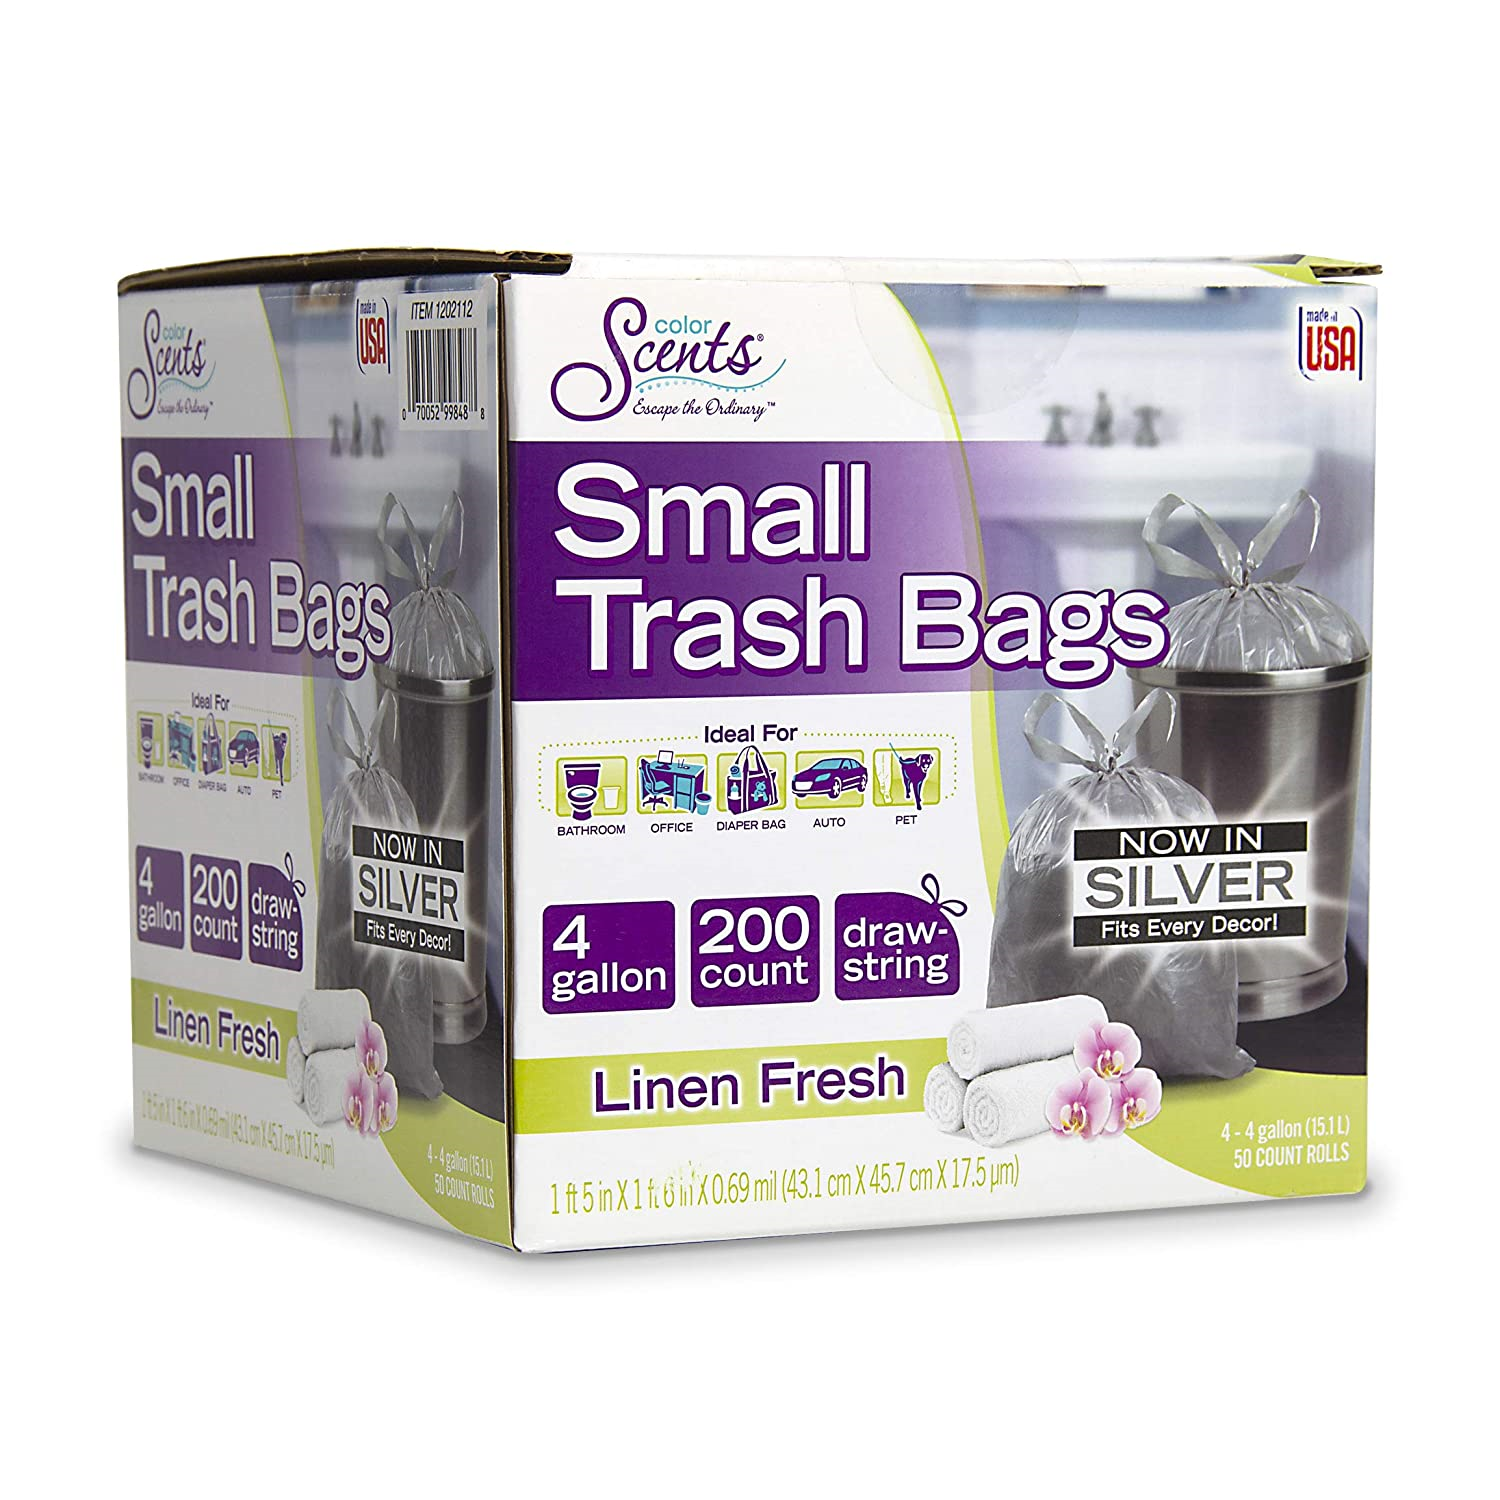 Color Scents Small Trash Bags - 4 Gallon, 200 Total Bags 1 Pack of 200 Count, - COLOR SCENTS Not Applicable